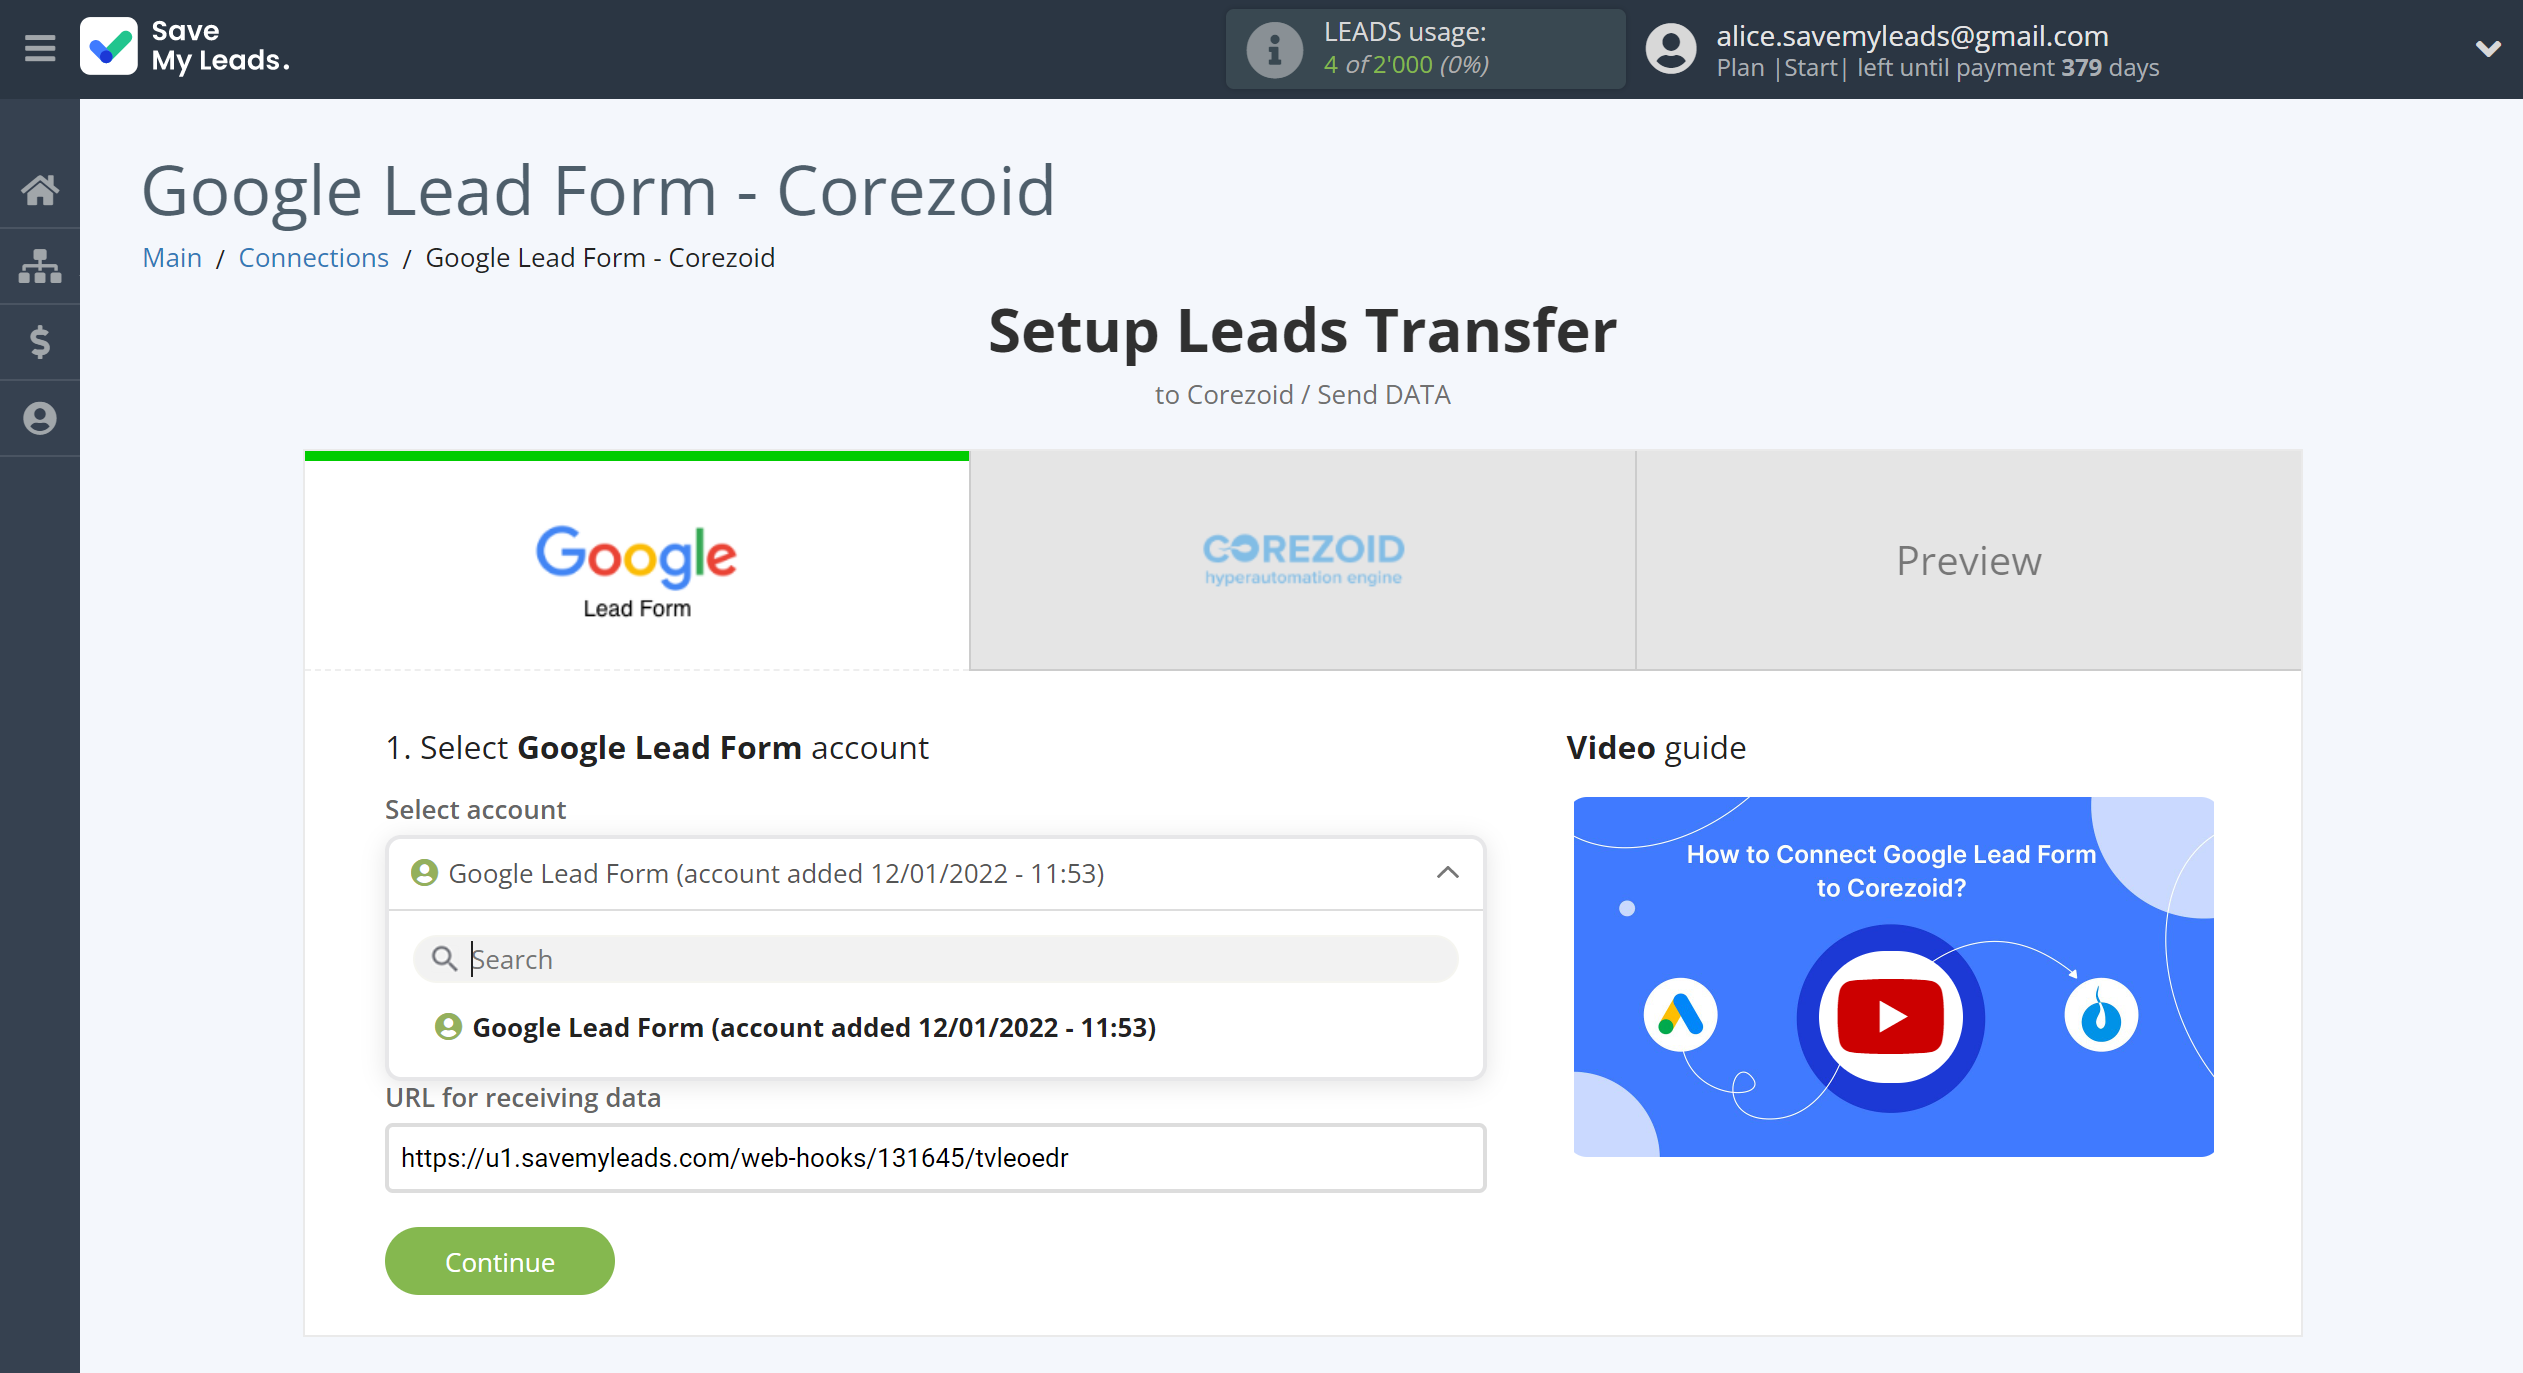 How to Connect Google Lead Form with Corezoid | Data Source account selection